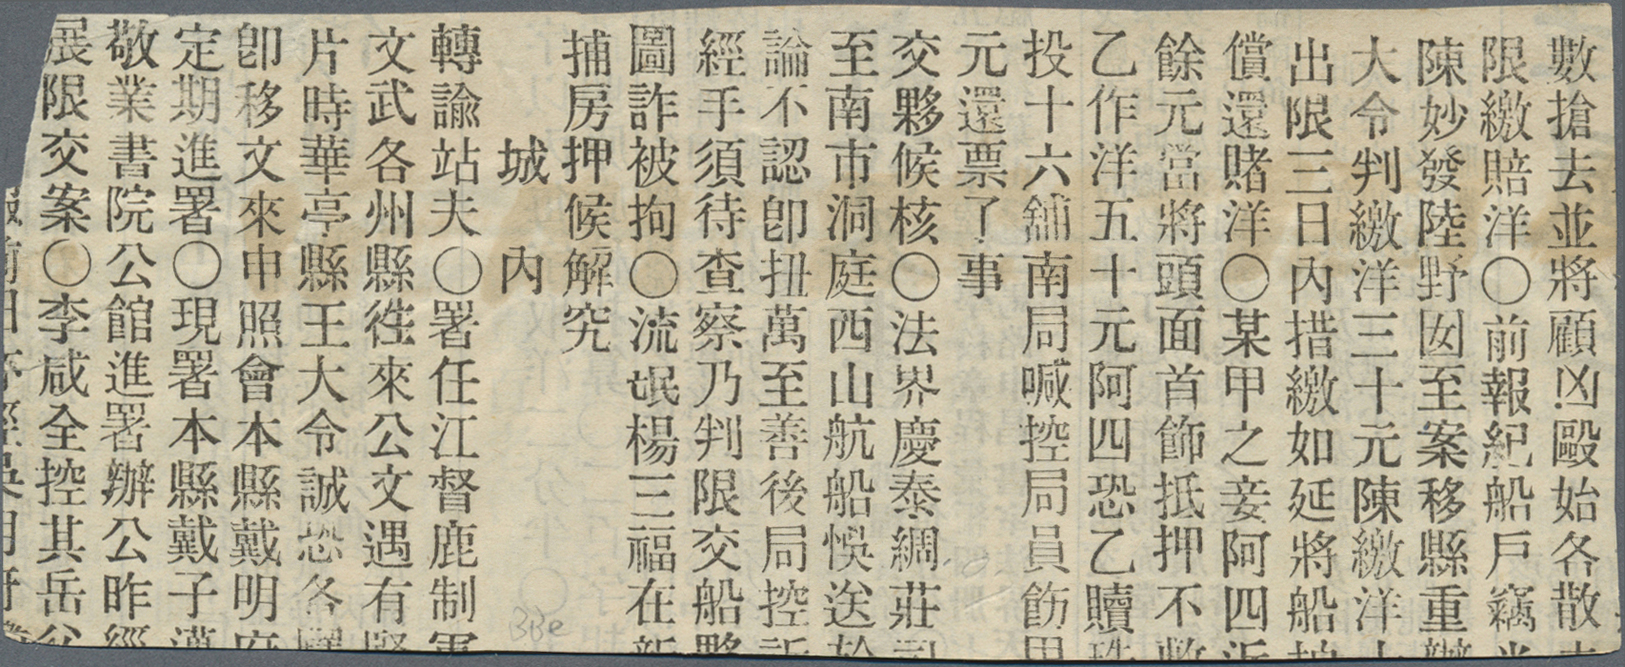 Br/ Japanische Post In China: 1901. News-Band Wrapper Front Addressed To 'The Chinese World, San Francisco' Bearing Chin - 1943-45 Shanghai & Nankin